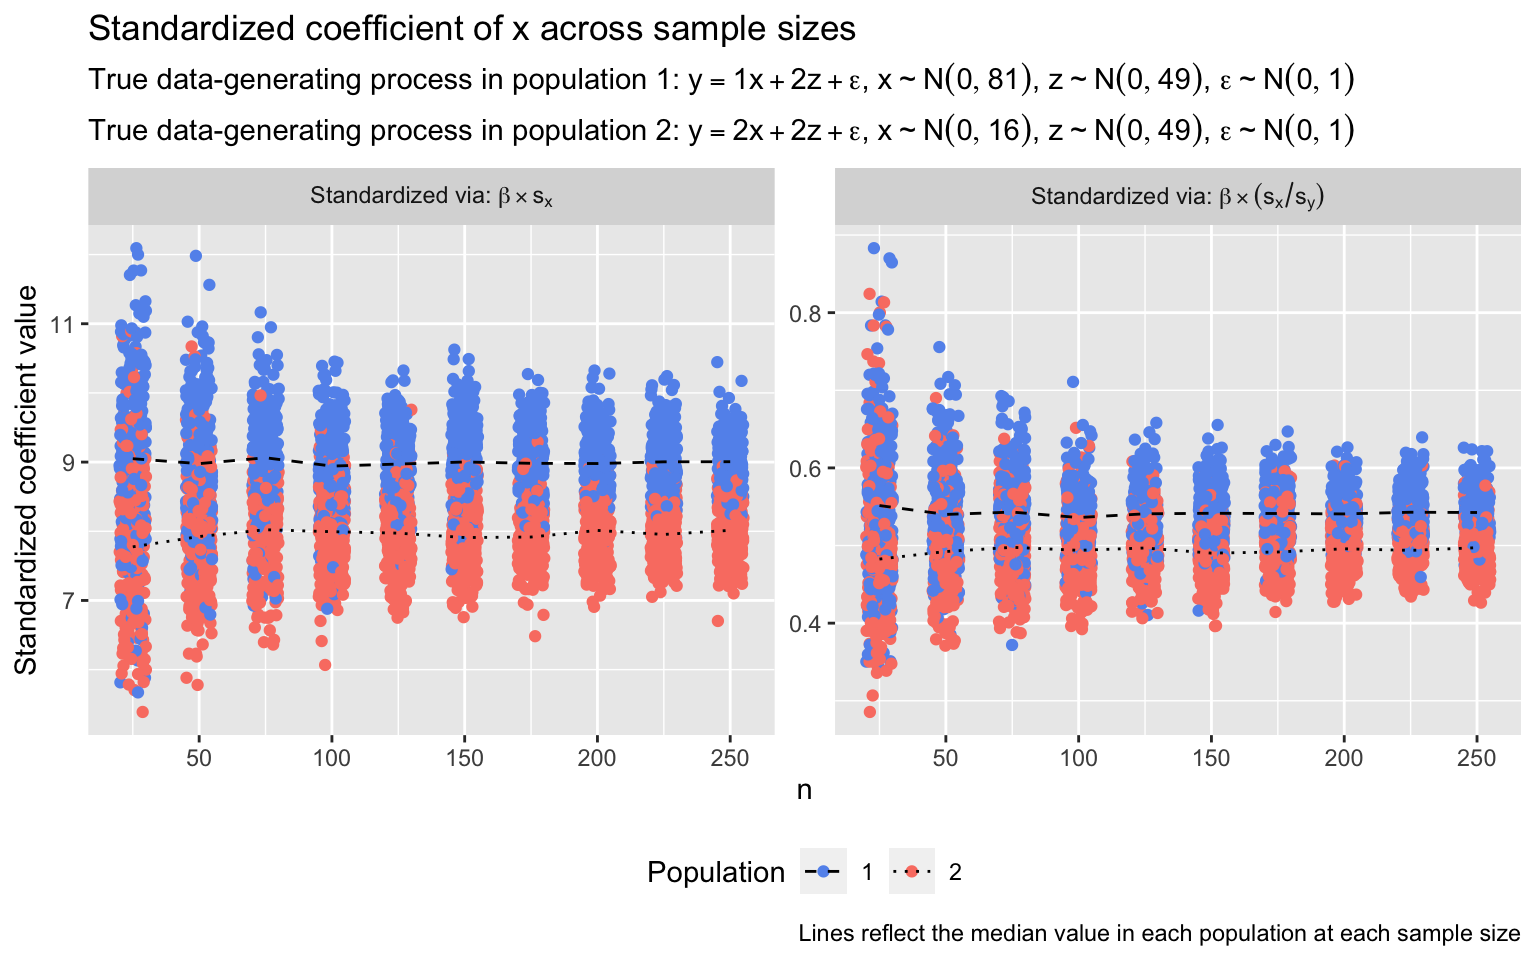 Standardized coefficients of x across sample sizes in two populations, where x’s unstandardized coefficient differs but x’s standard deviation is the same across populations